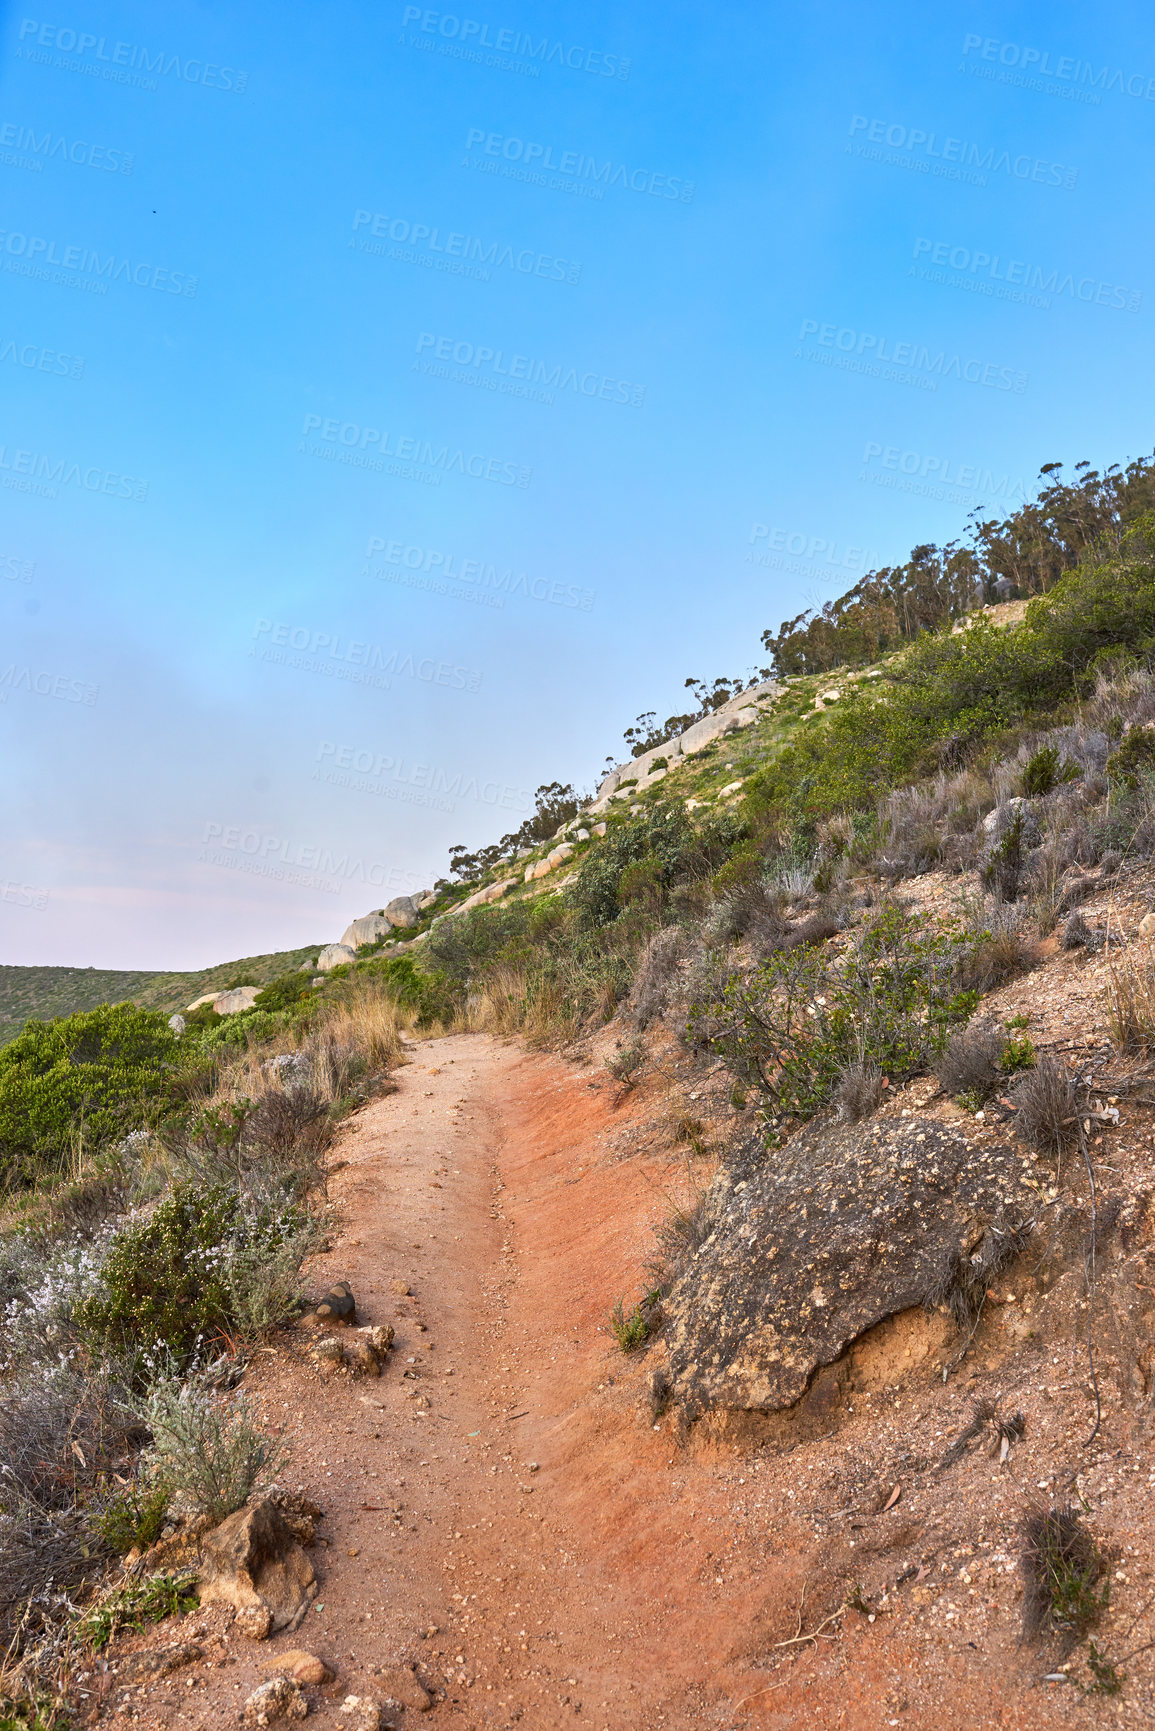 Buy stock photo Hiking trail to explore and travel in nature outdoors along the mountain with clear blue sky background and copy space. Landscape with plants and shrubs alongside a rugged and sandy path on a cliff